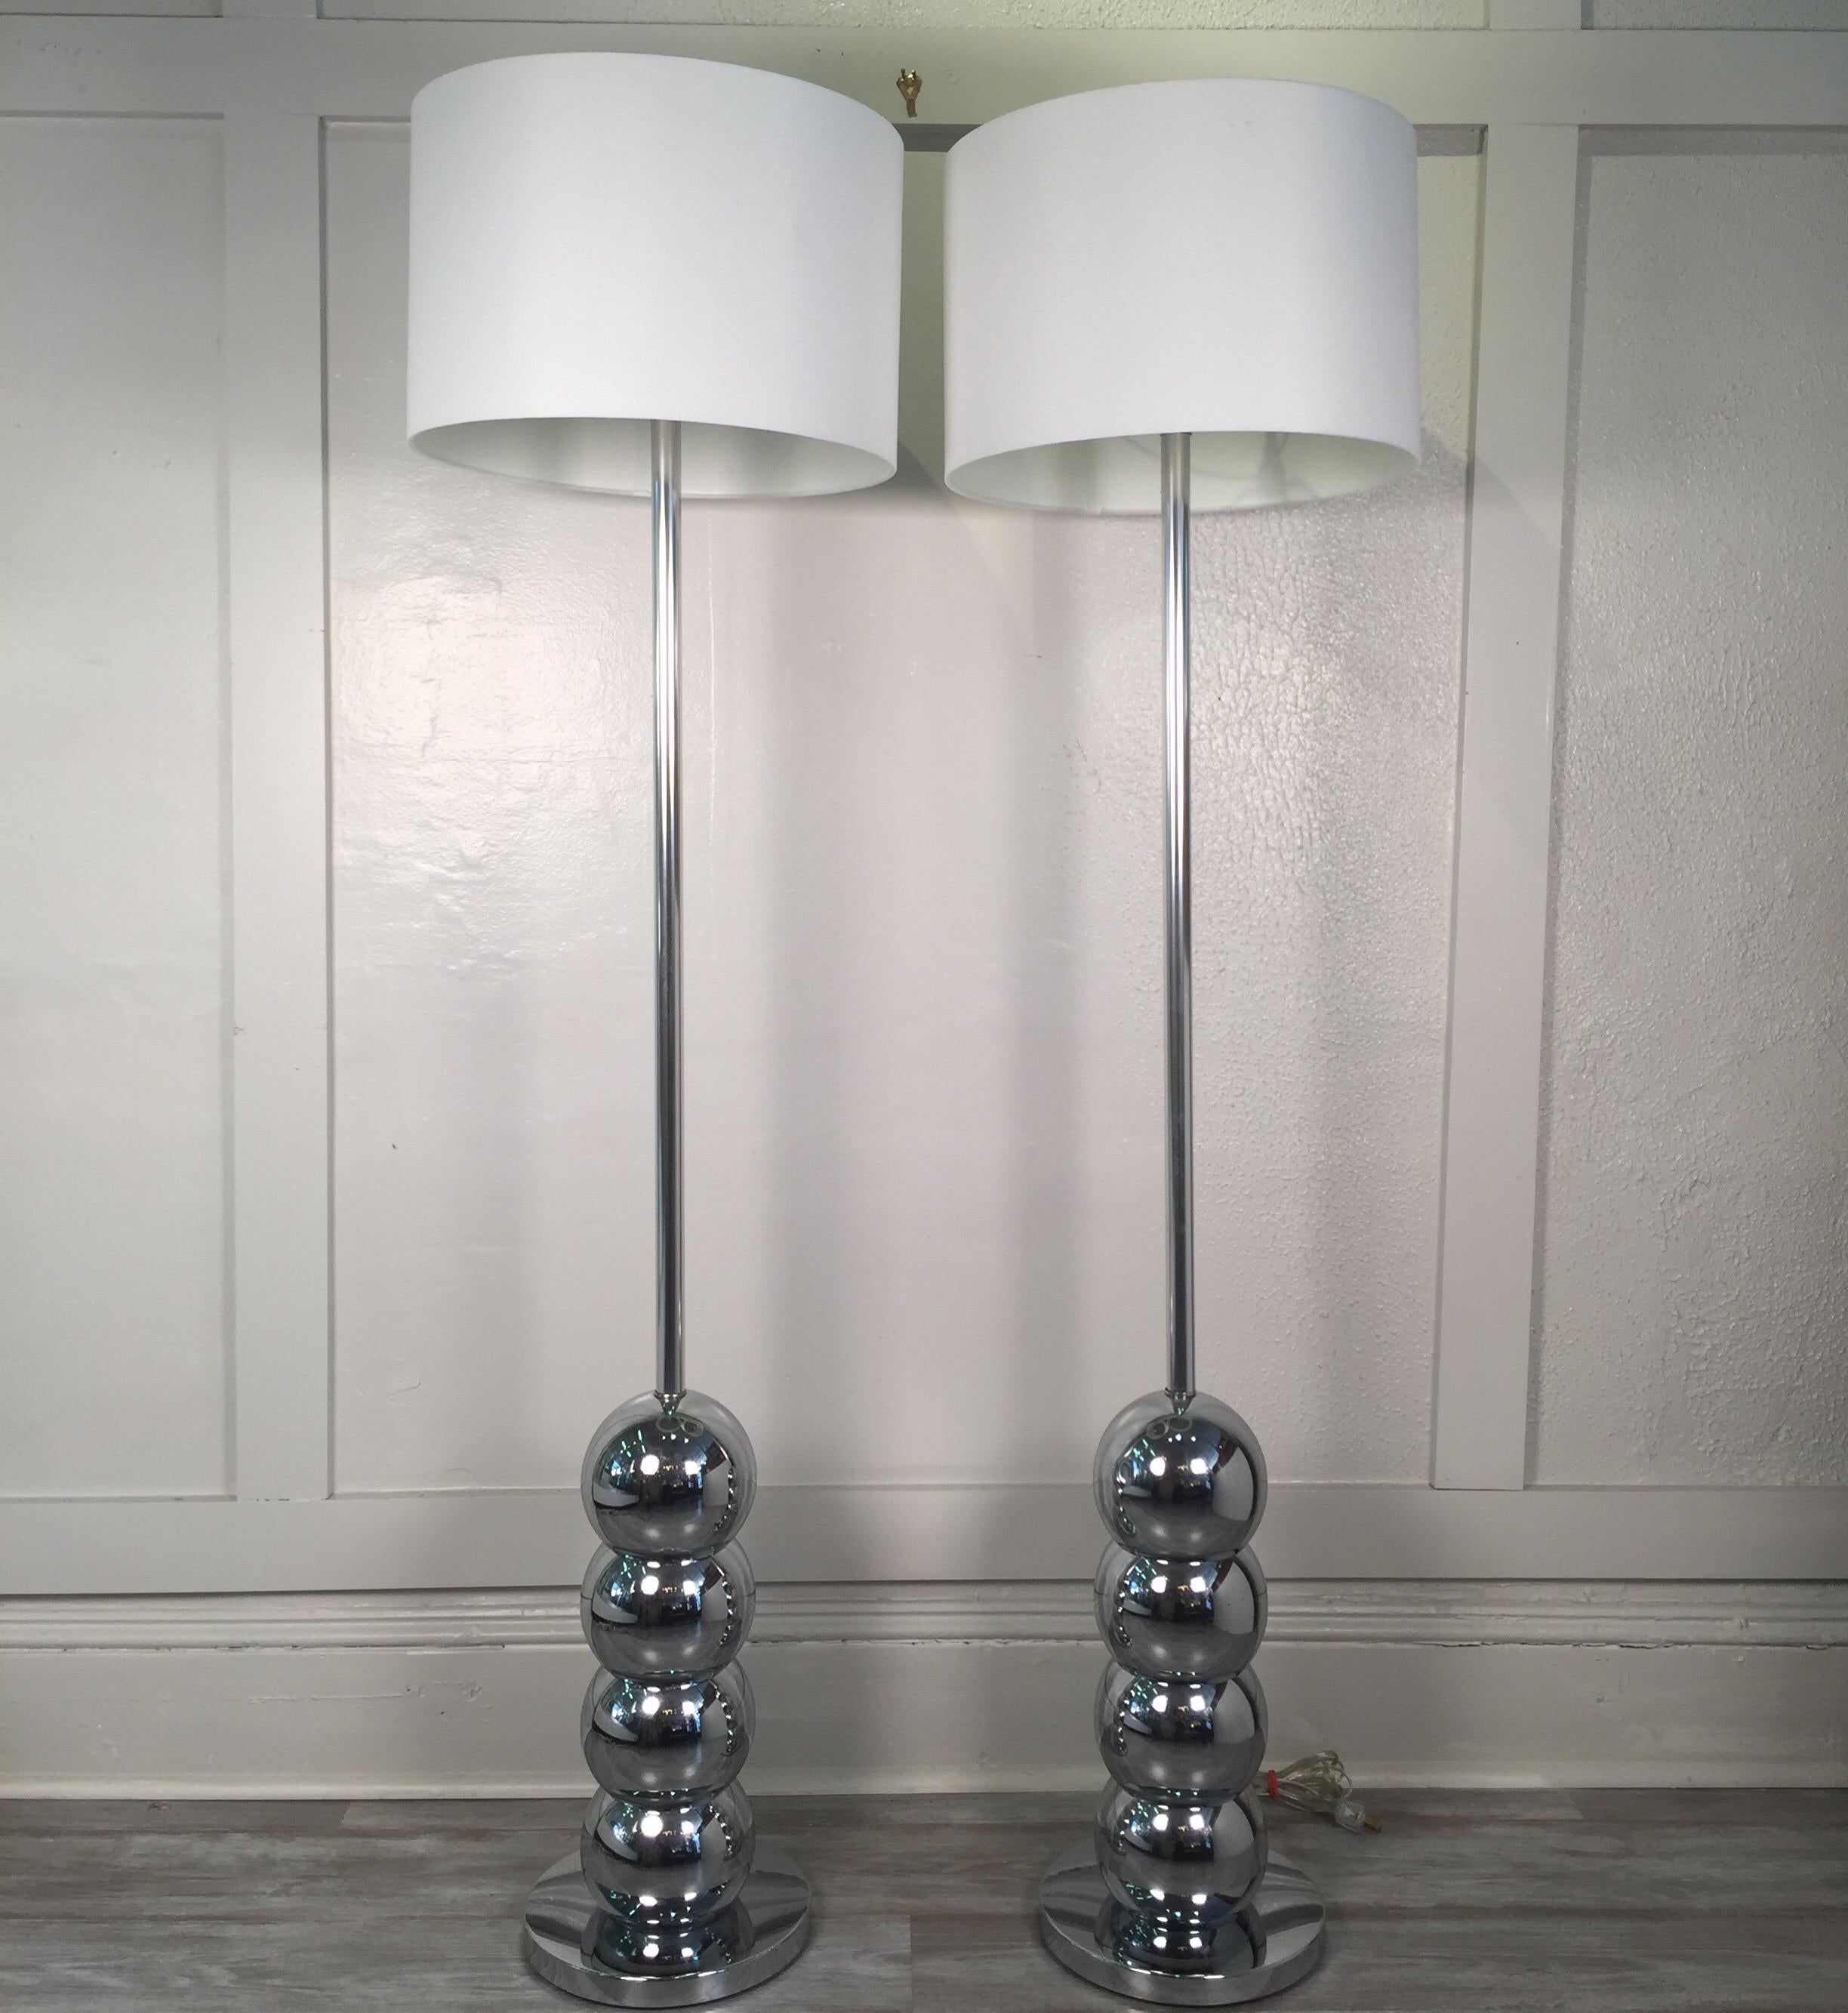 Mid-Century Modern Chrome Stacked Ball Floor Lamps in the Manner of George Kovacs, a Pair